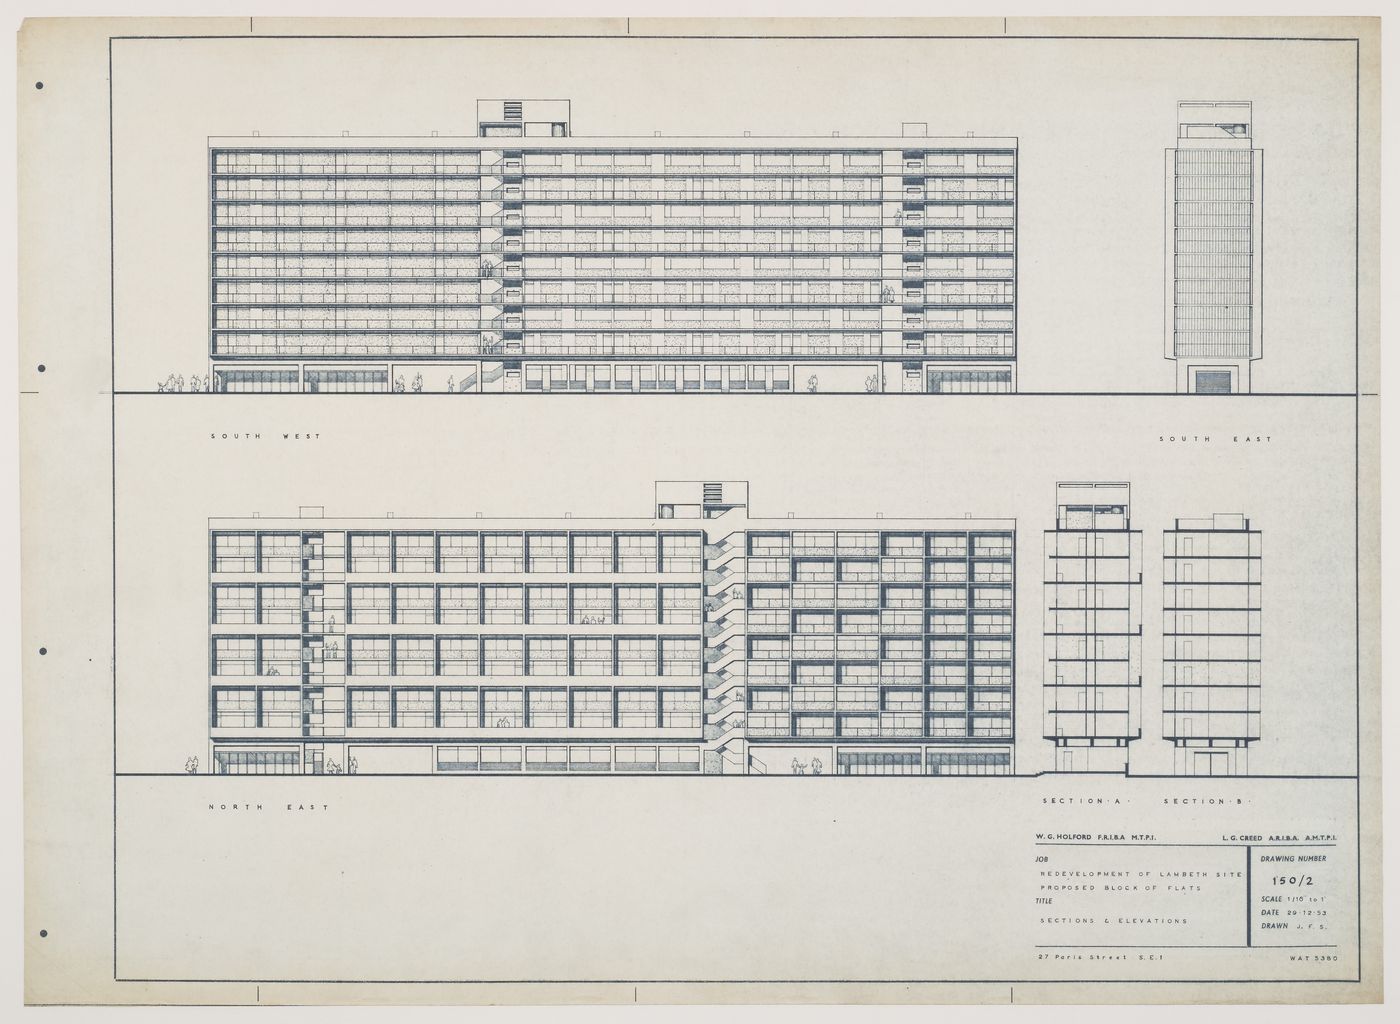 Apartment Houses, Lambeth, London, England: elevations and sections
